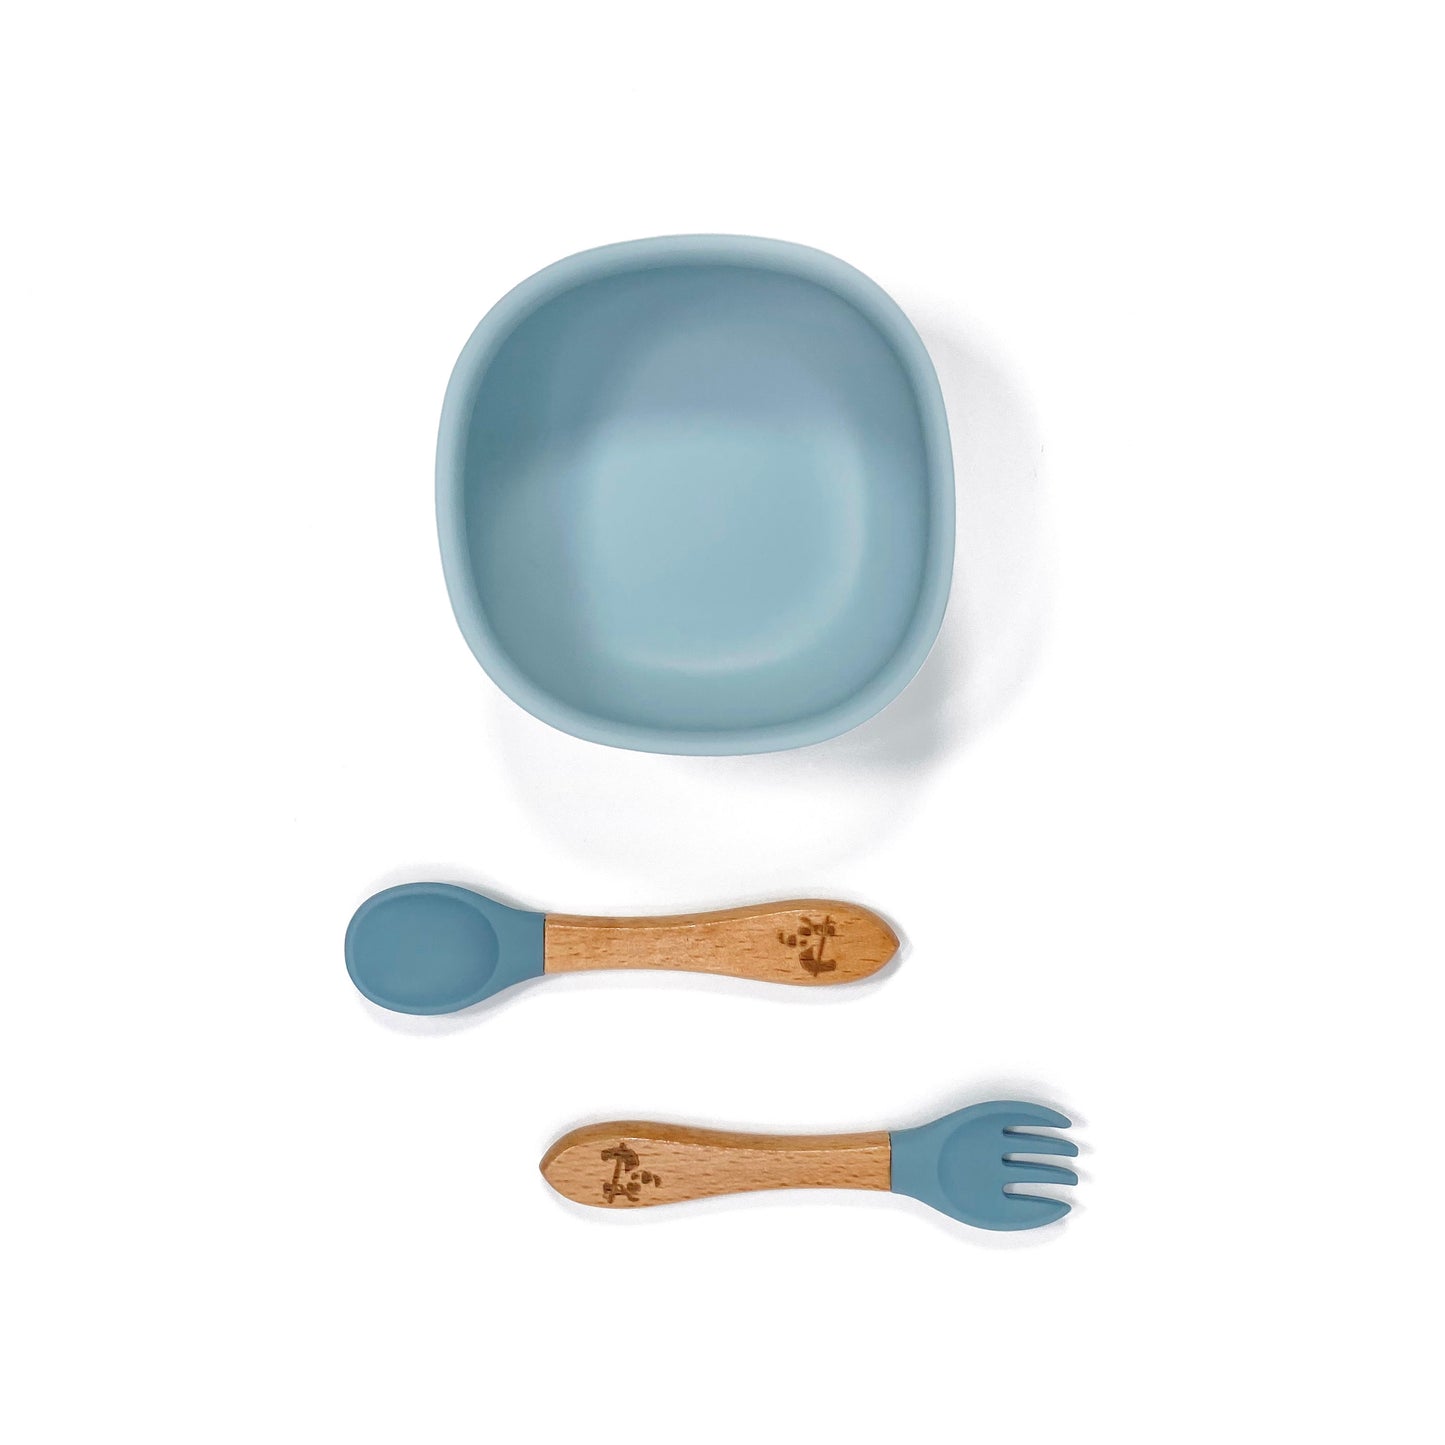 An ocean blue silicone children’s feeding bowl, with matching bamboo and silicone cutlery.